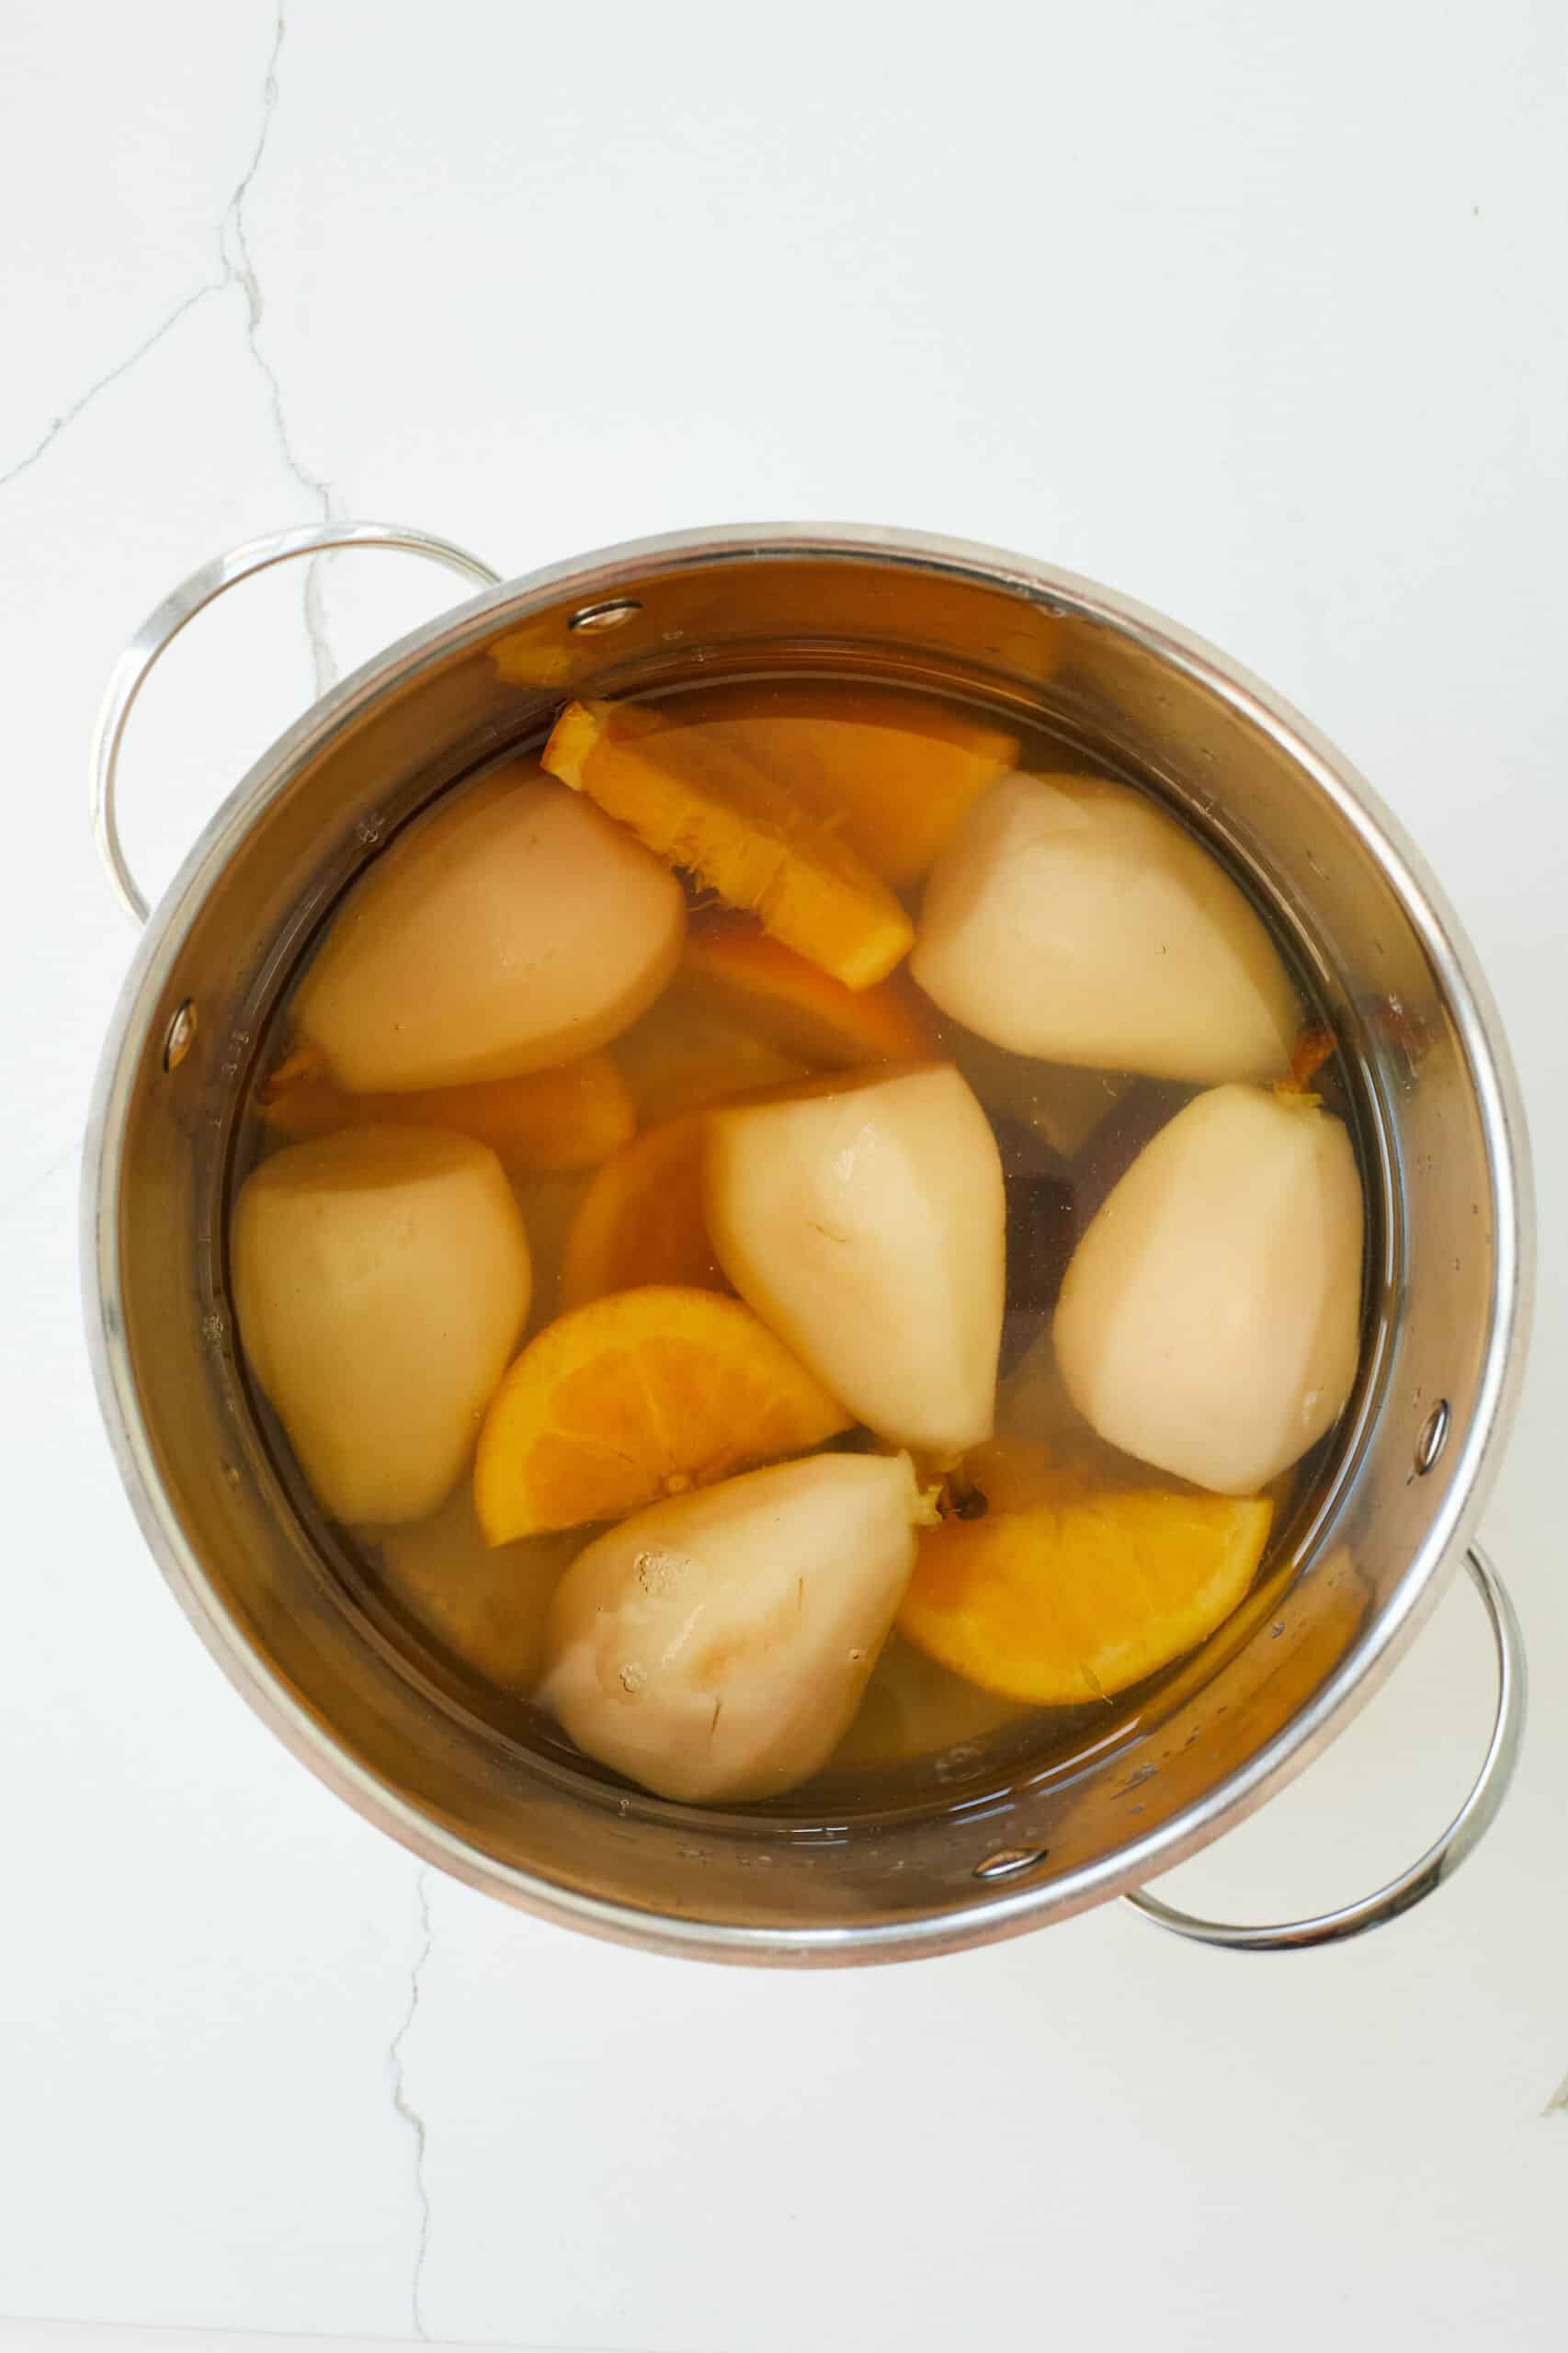 Step-by-step instructions on poaching pears: Keep water at a very gentle simmer and cook until the pears can be easily pierced through.